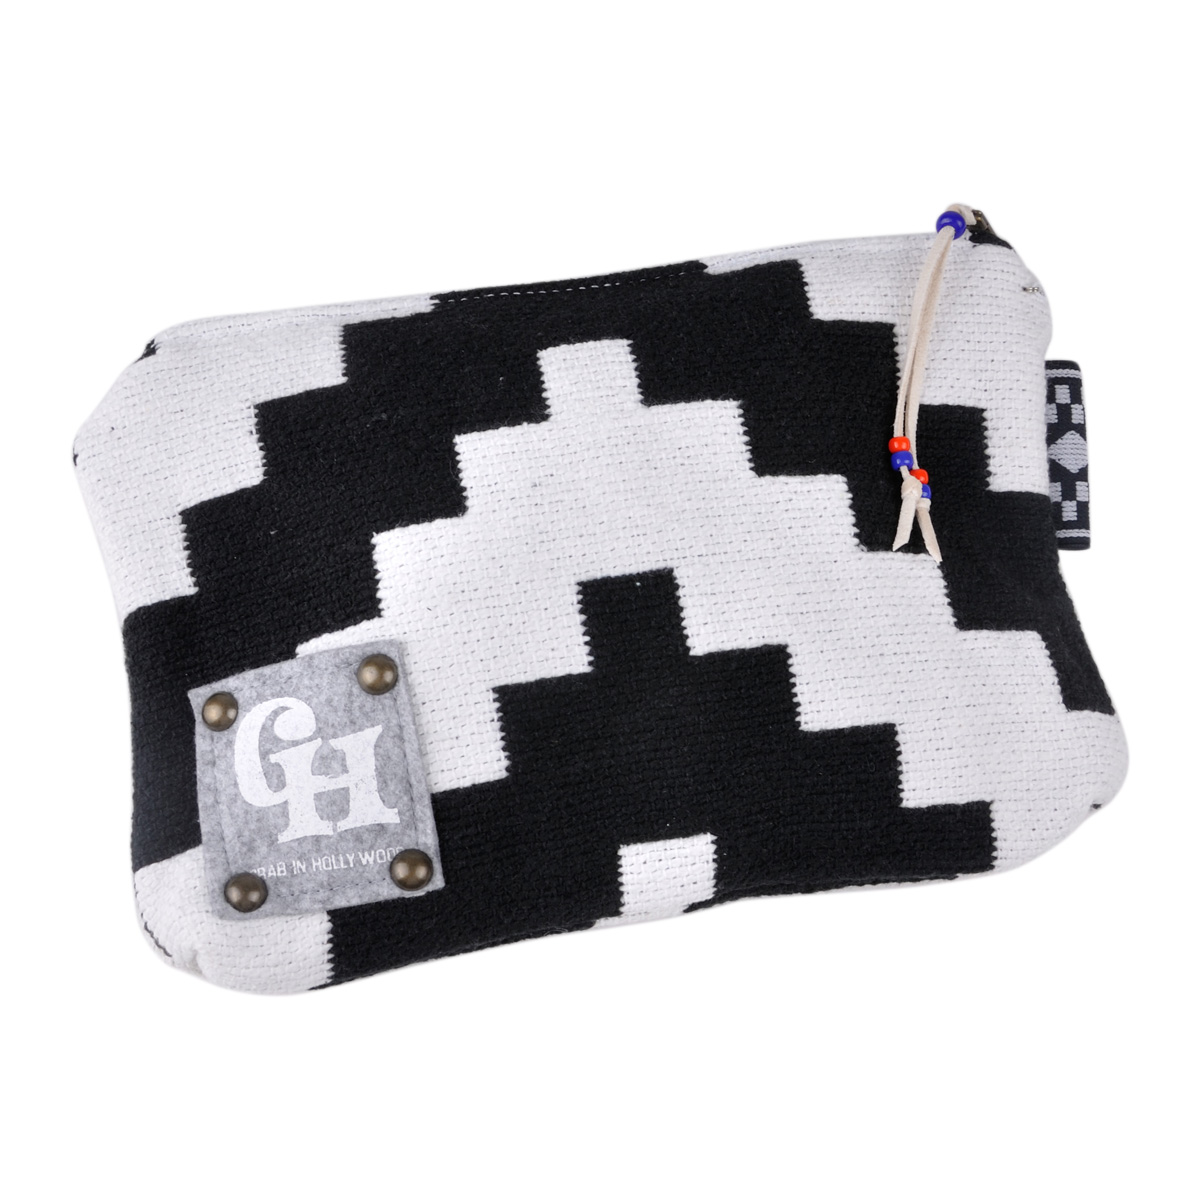 NATIVE POUCH[ネイティブポーチ]WHT/BLK – GRAB IN HOLLYWOOD